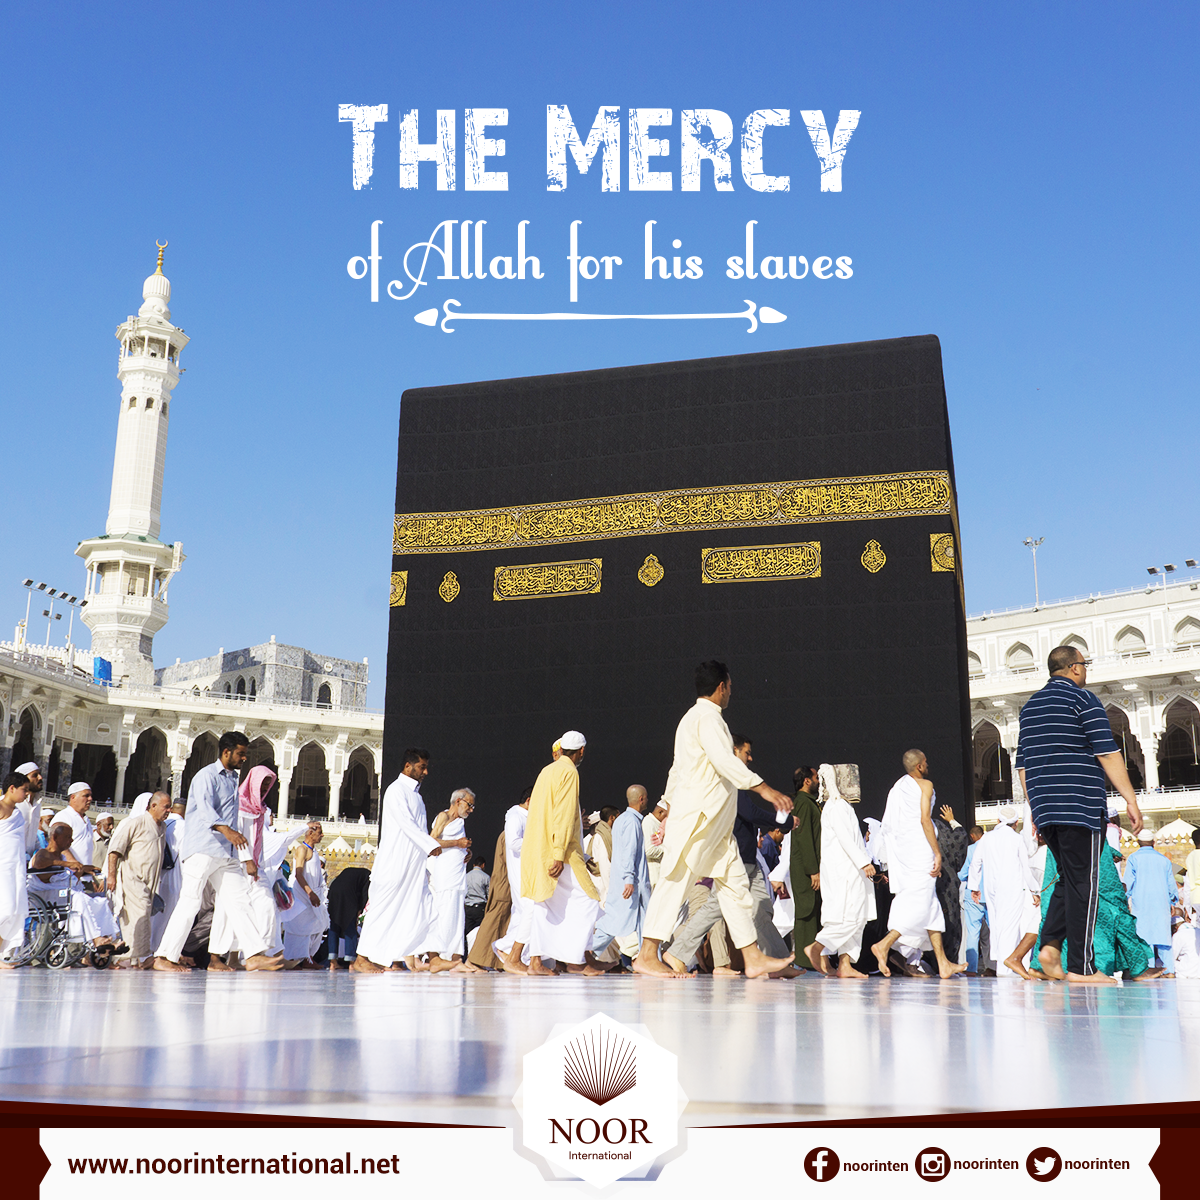 The Mercy of Allah for his slaves